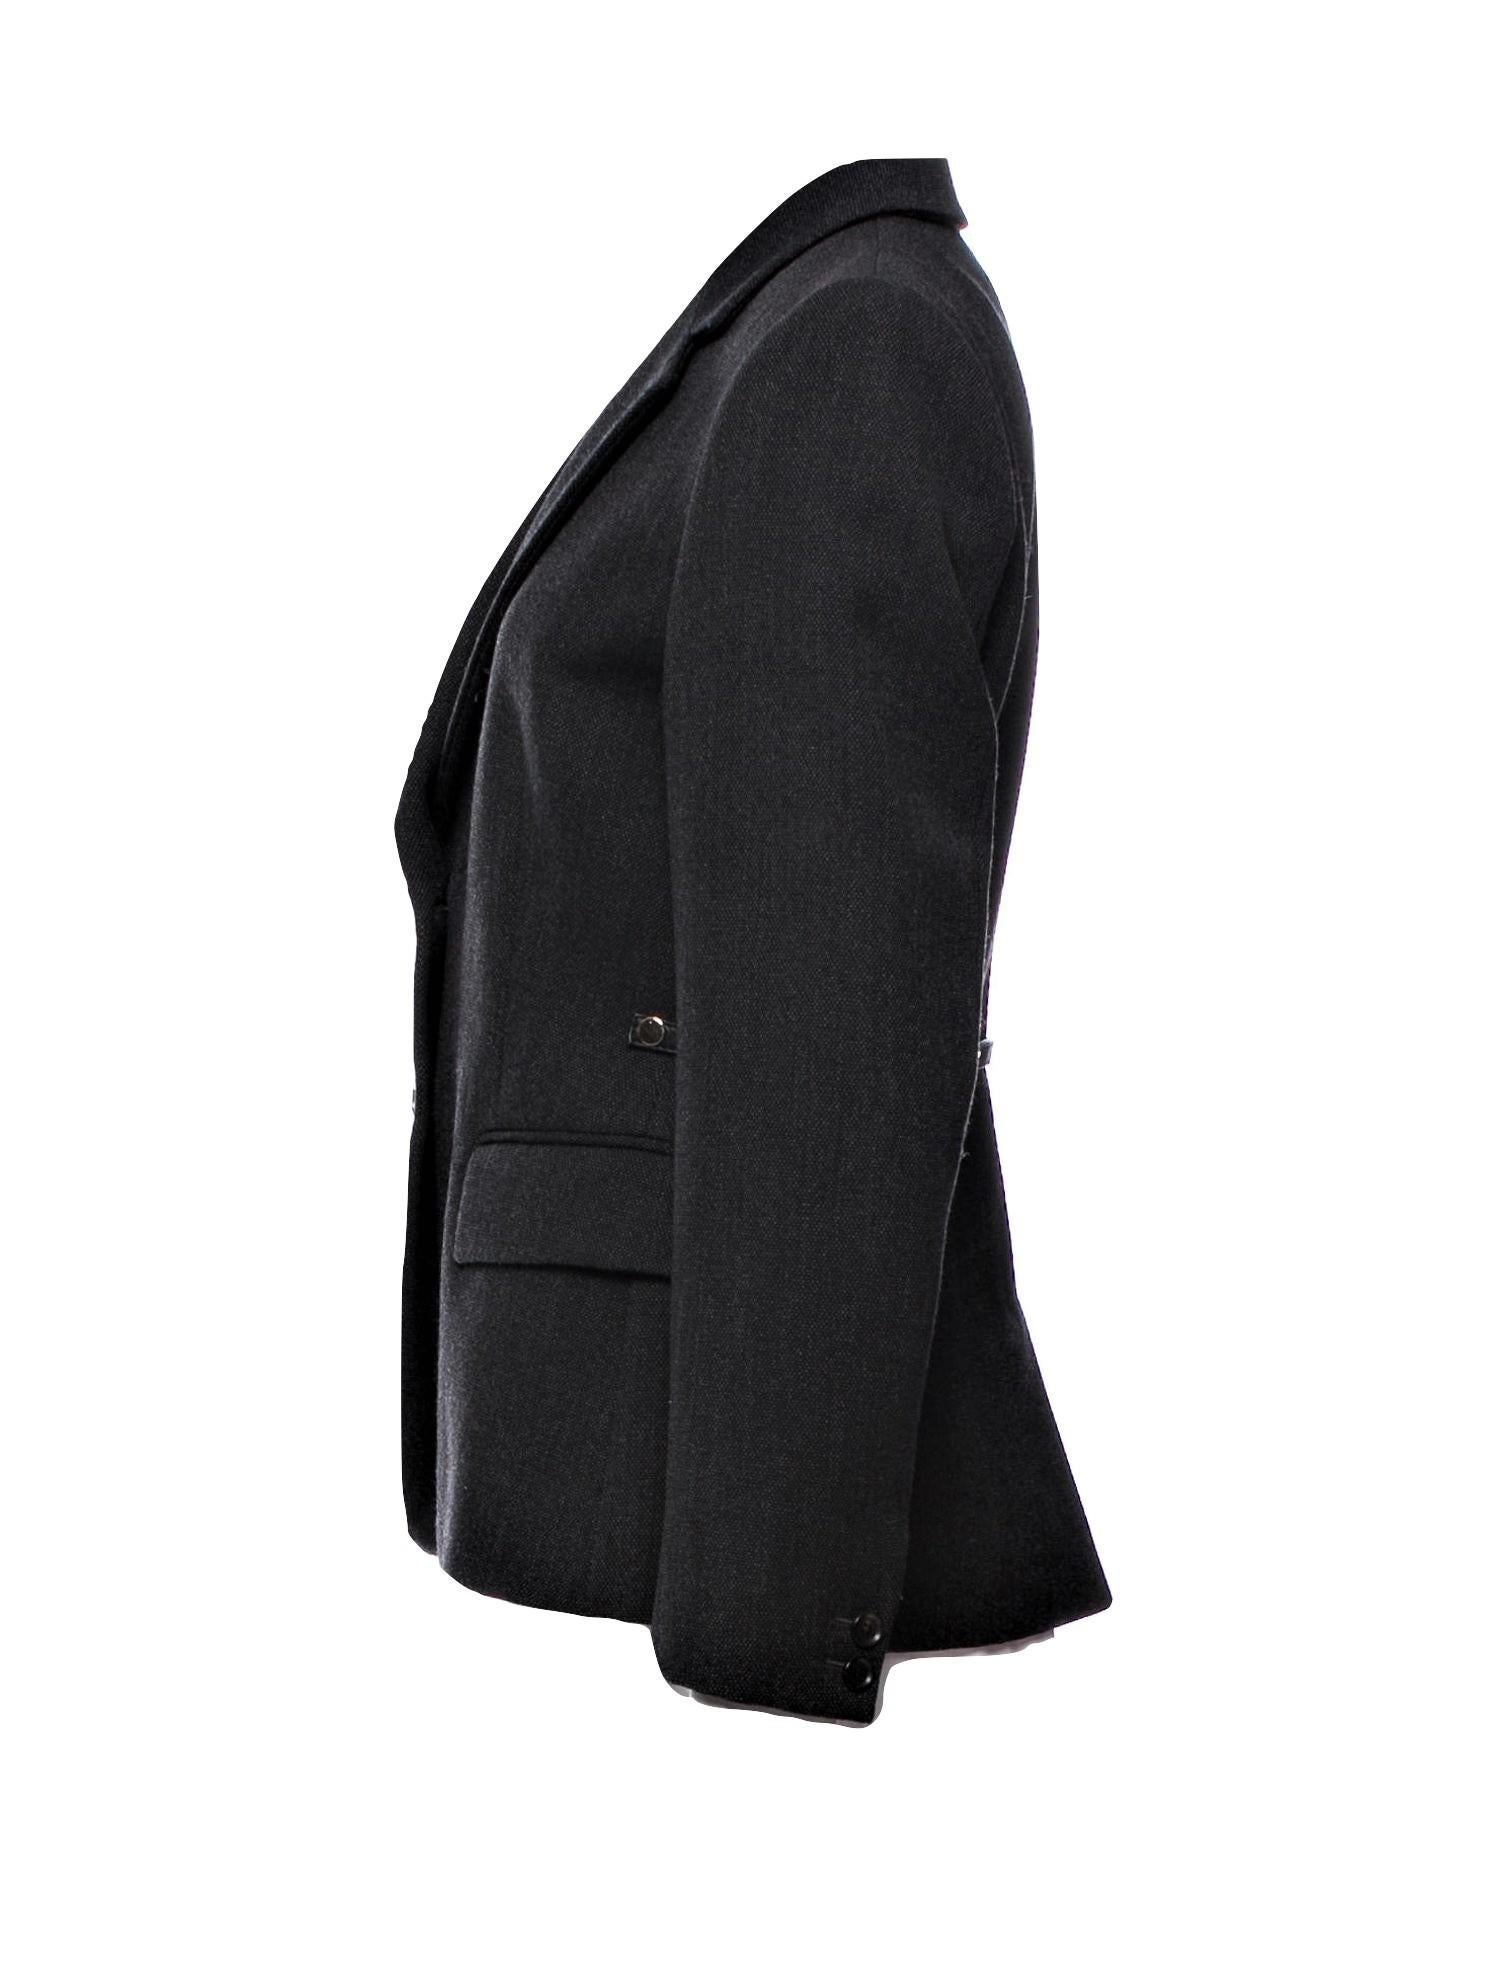 Gucci Runway Ad Blazer Jacket 
F/W 2006 
Size: IT 44 Roughly U.S. 6
Brand New 
We are Gaga over the 'House of Gucci' movie and Gucci's
100th Birthday
$1975
Dark Charcoal Grey 
100% Wool
Dual Button at Sleeve
Gold & Leather Buckle Accent At